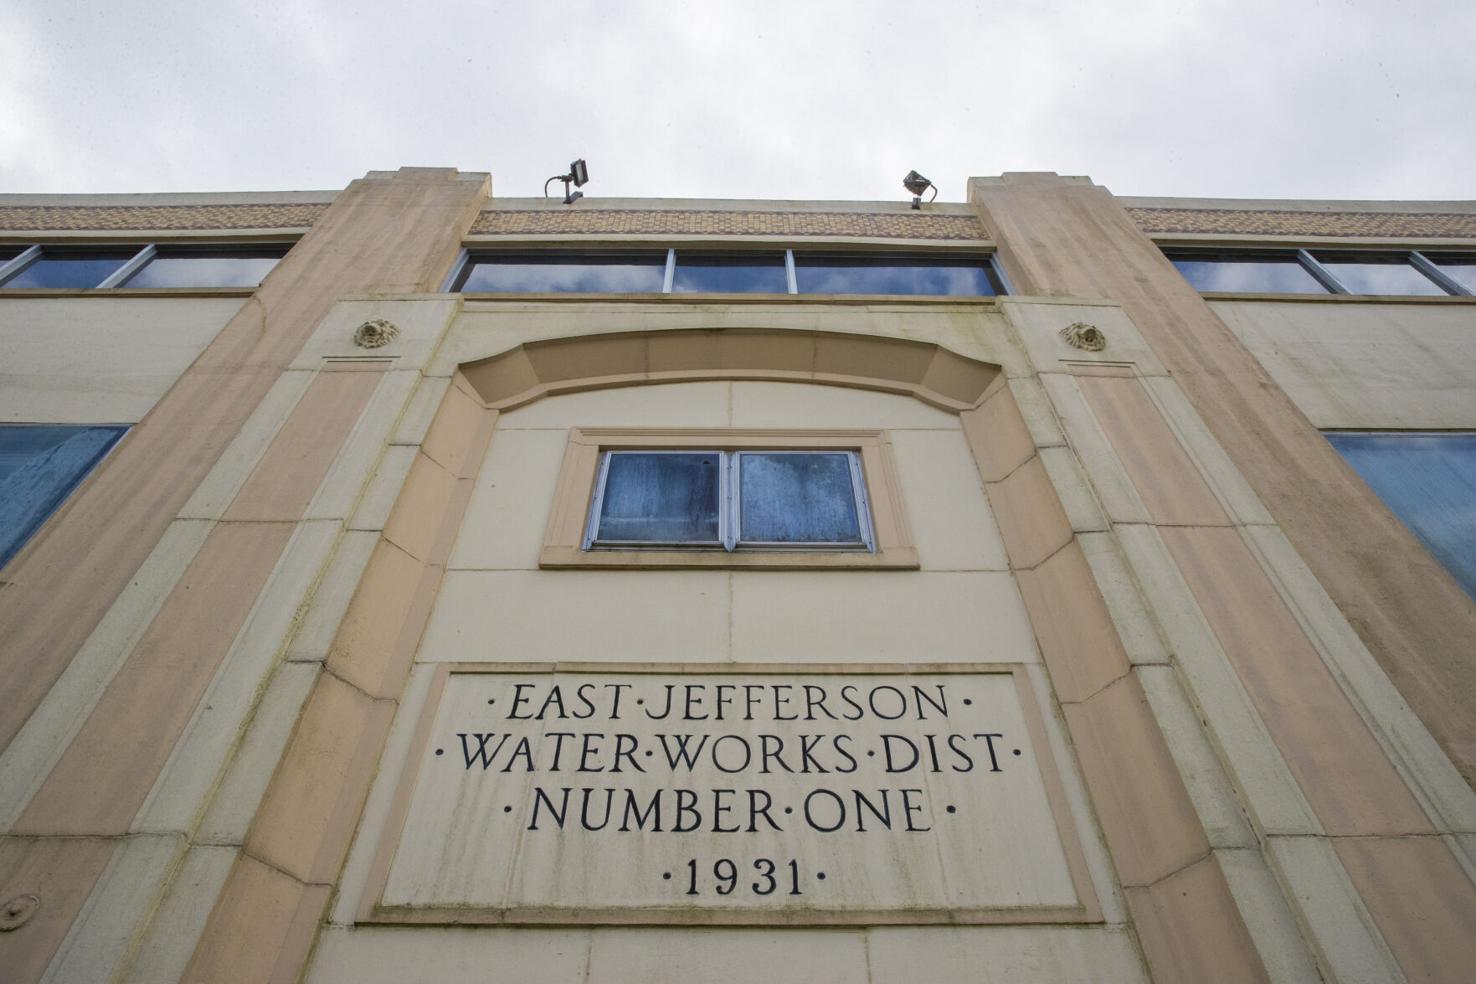 Boil water advisory lifted for East Jefferson; safe to drink water